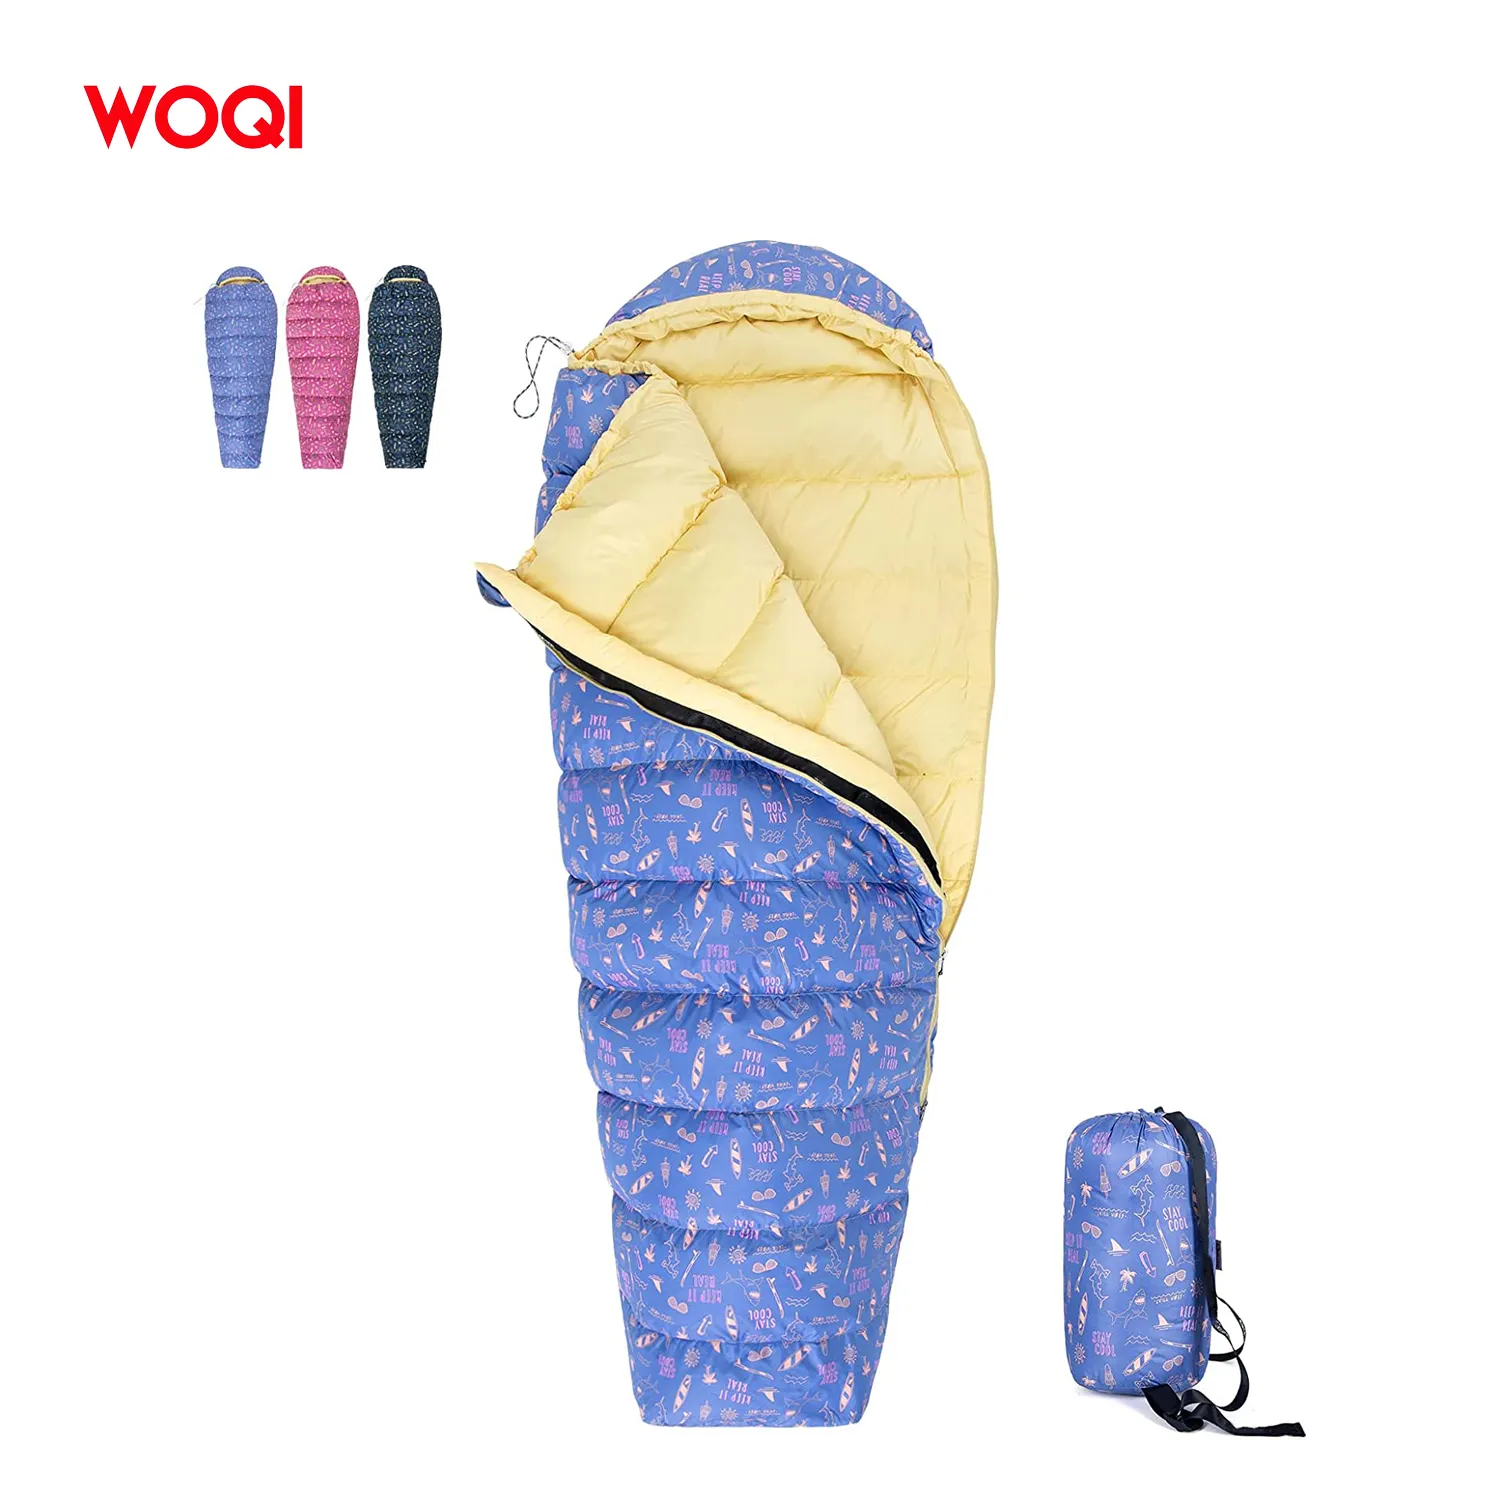 WOQI Children's Sleeping Bag Outdoor Camping Tourism Lightweight Sleeping Bag Suitable for Boys and Girls with Backpack Bags